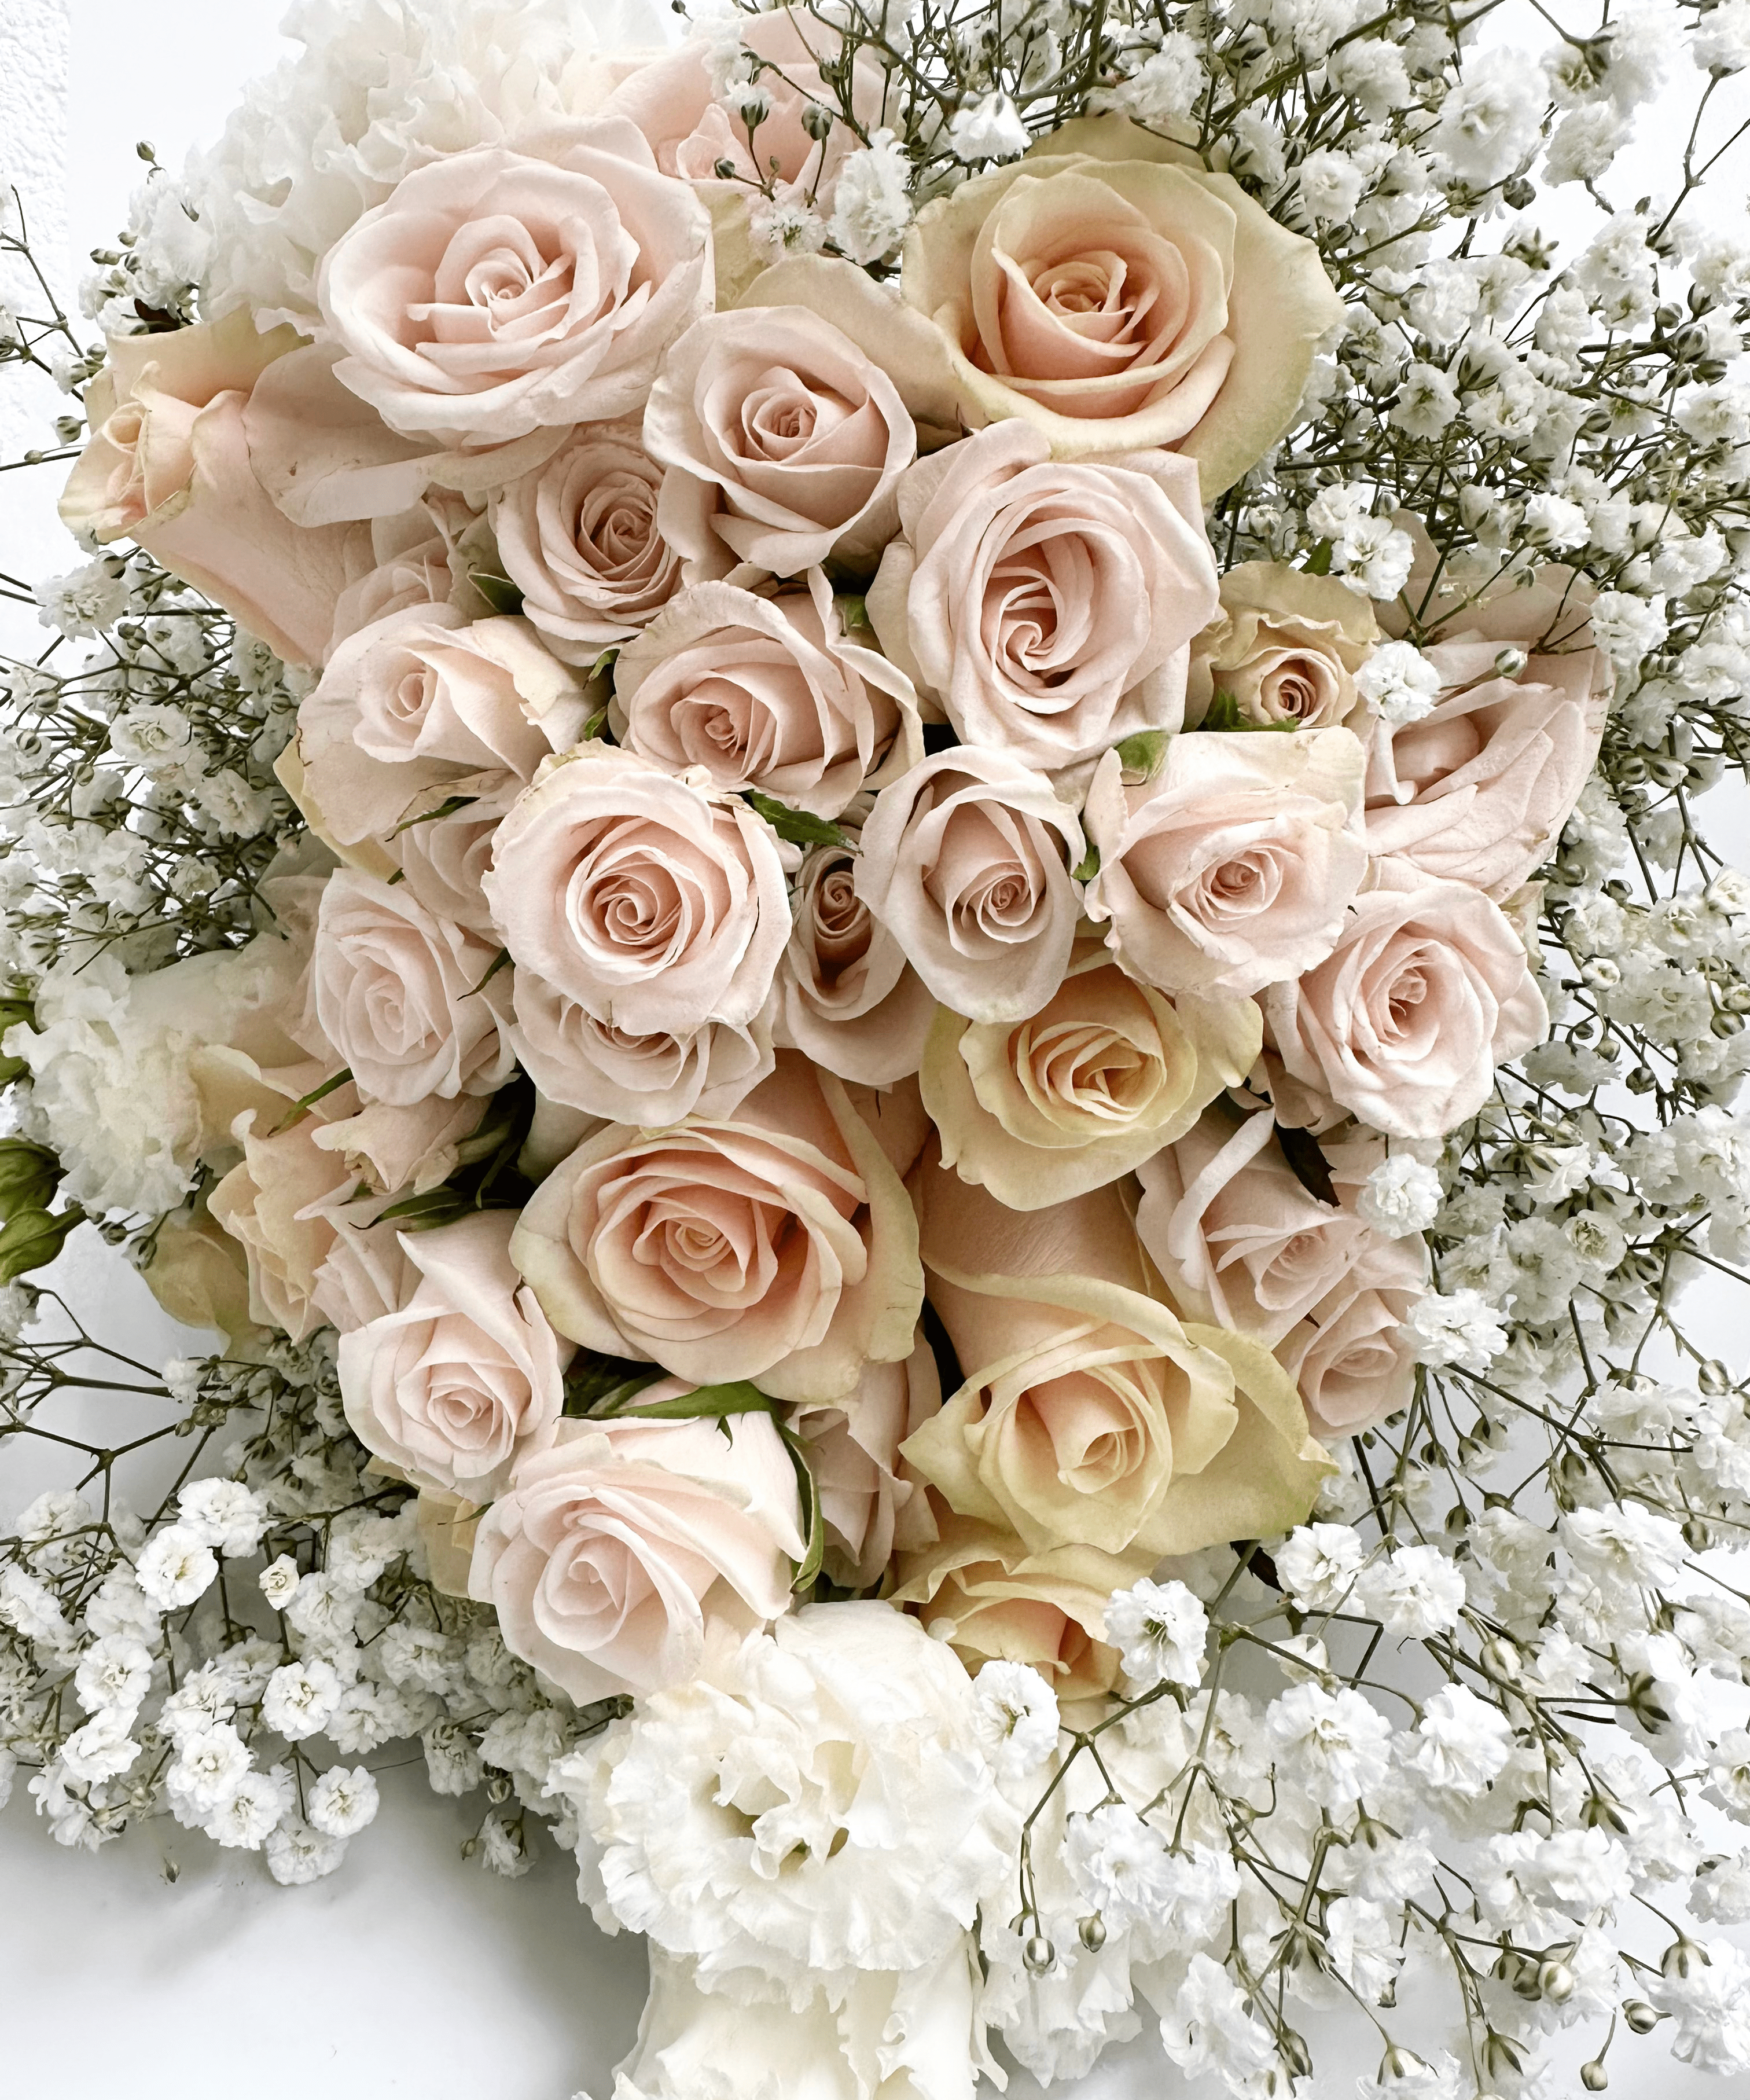 The Grace Bouquet  - Luxury Roses and Baby's Breath Bouquet Delivery